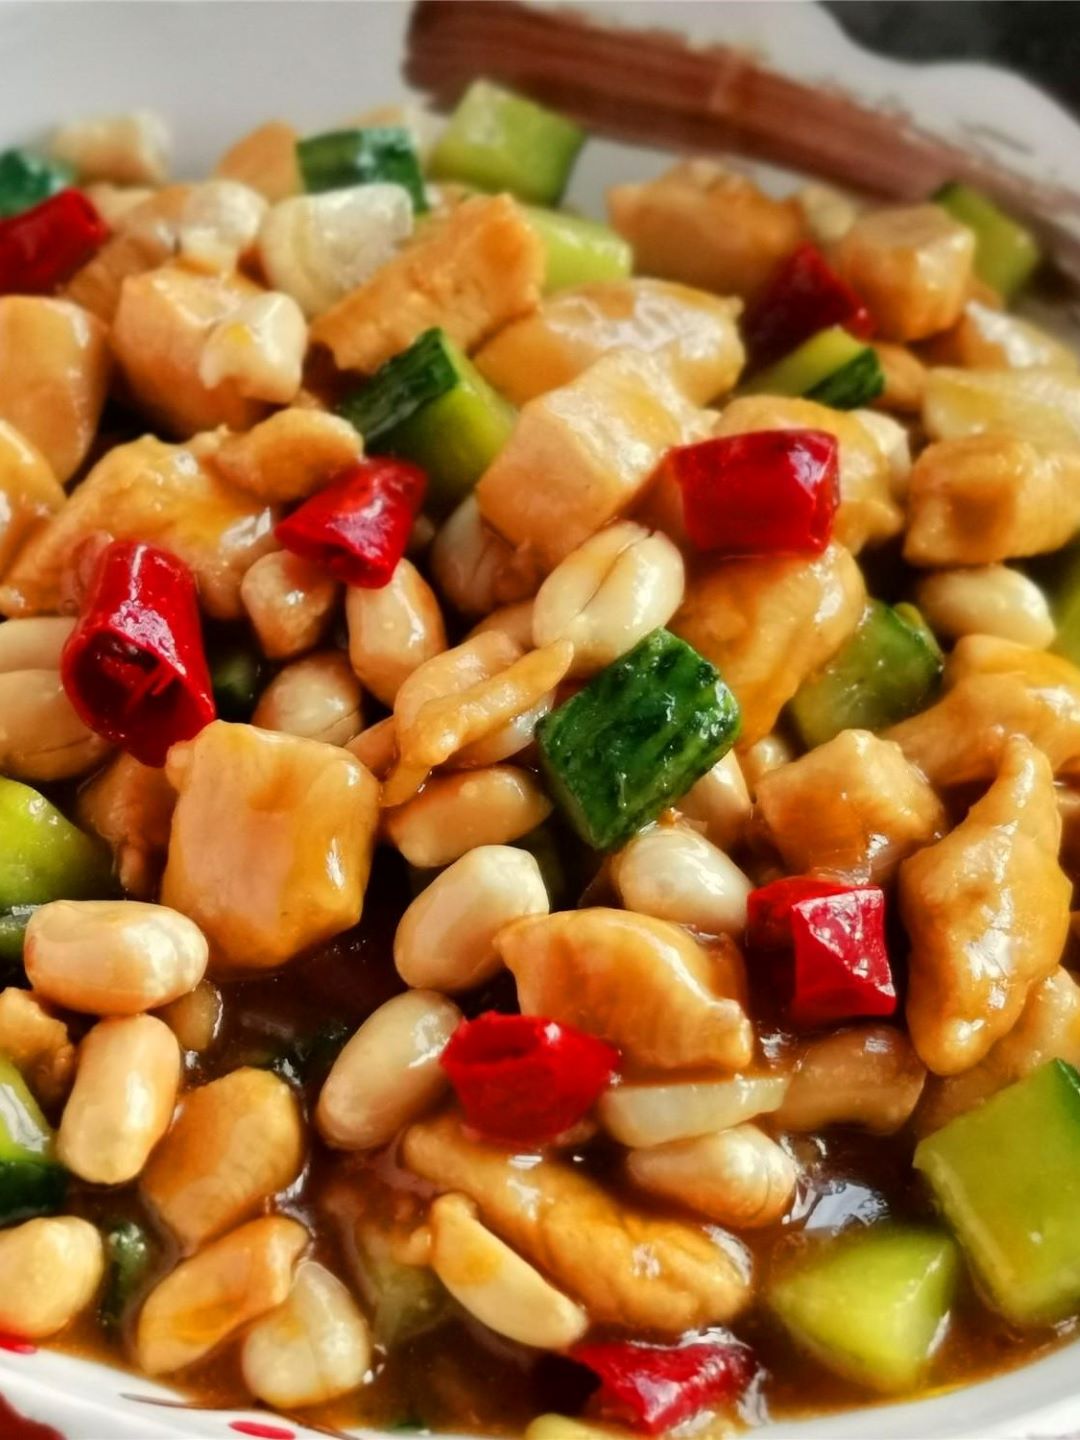 Kung pao chicken recipe healthy spicy diced chicken China food Chinese homemade dish recipe 